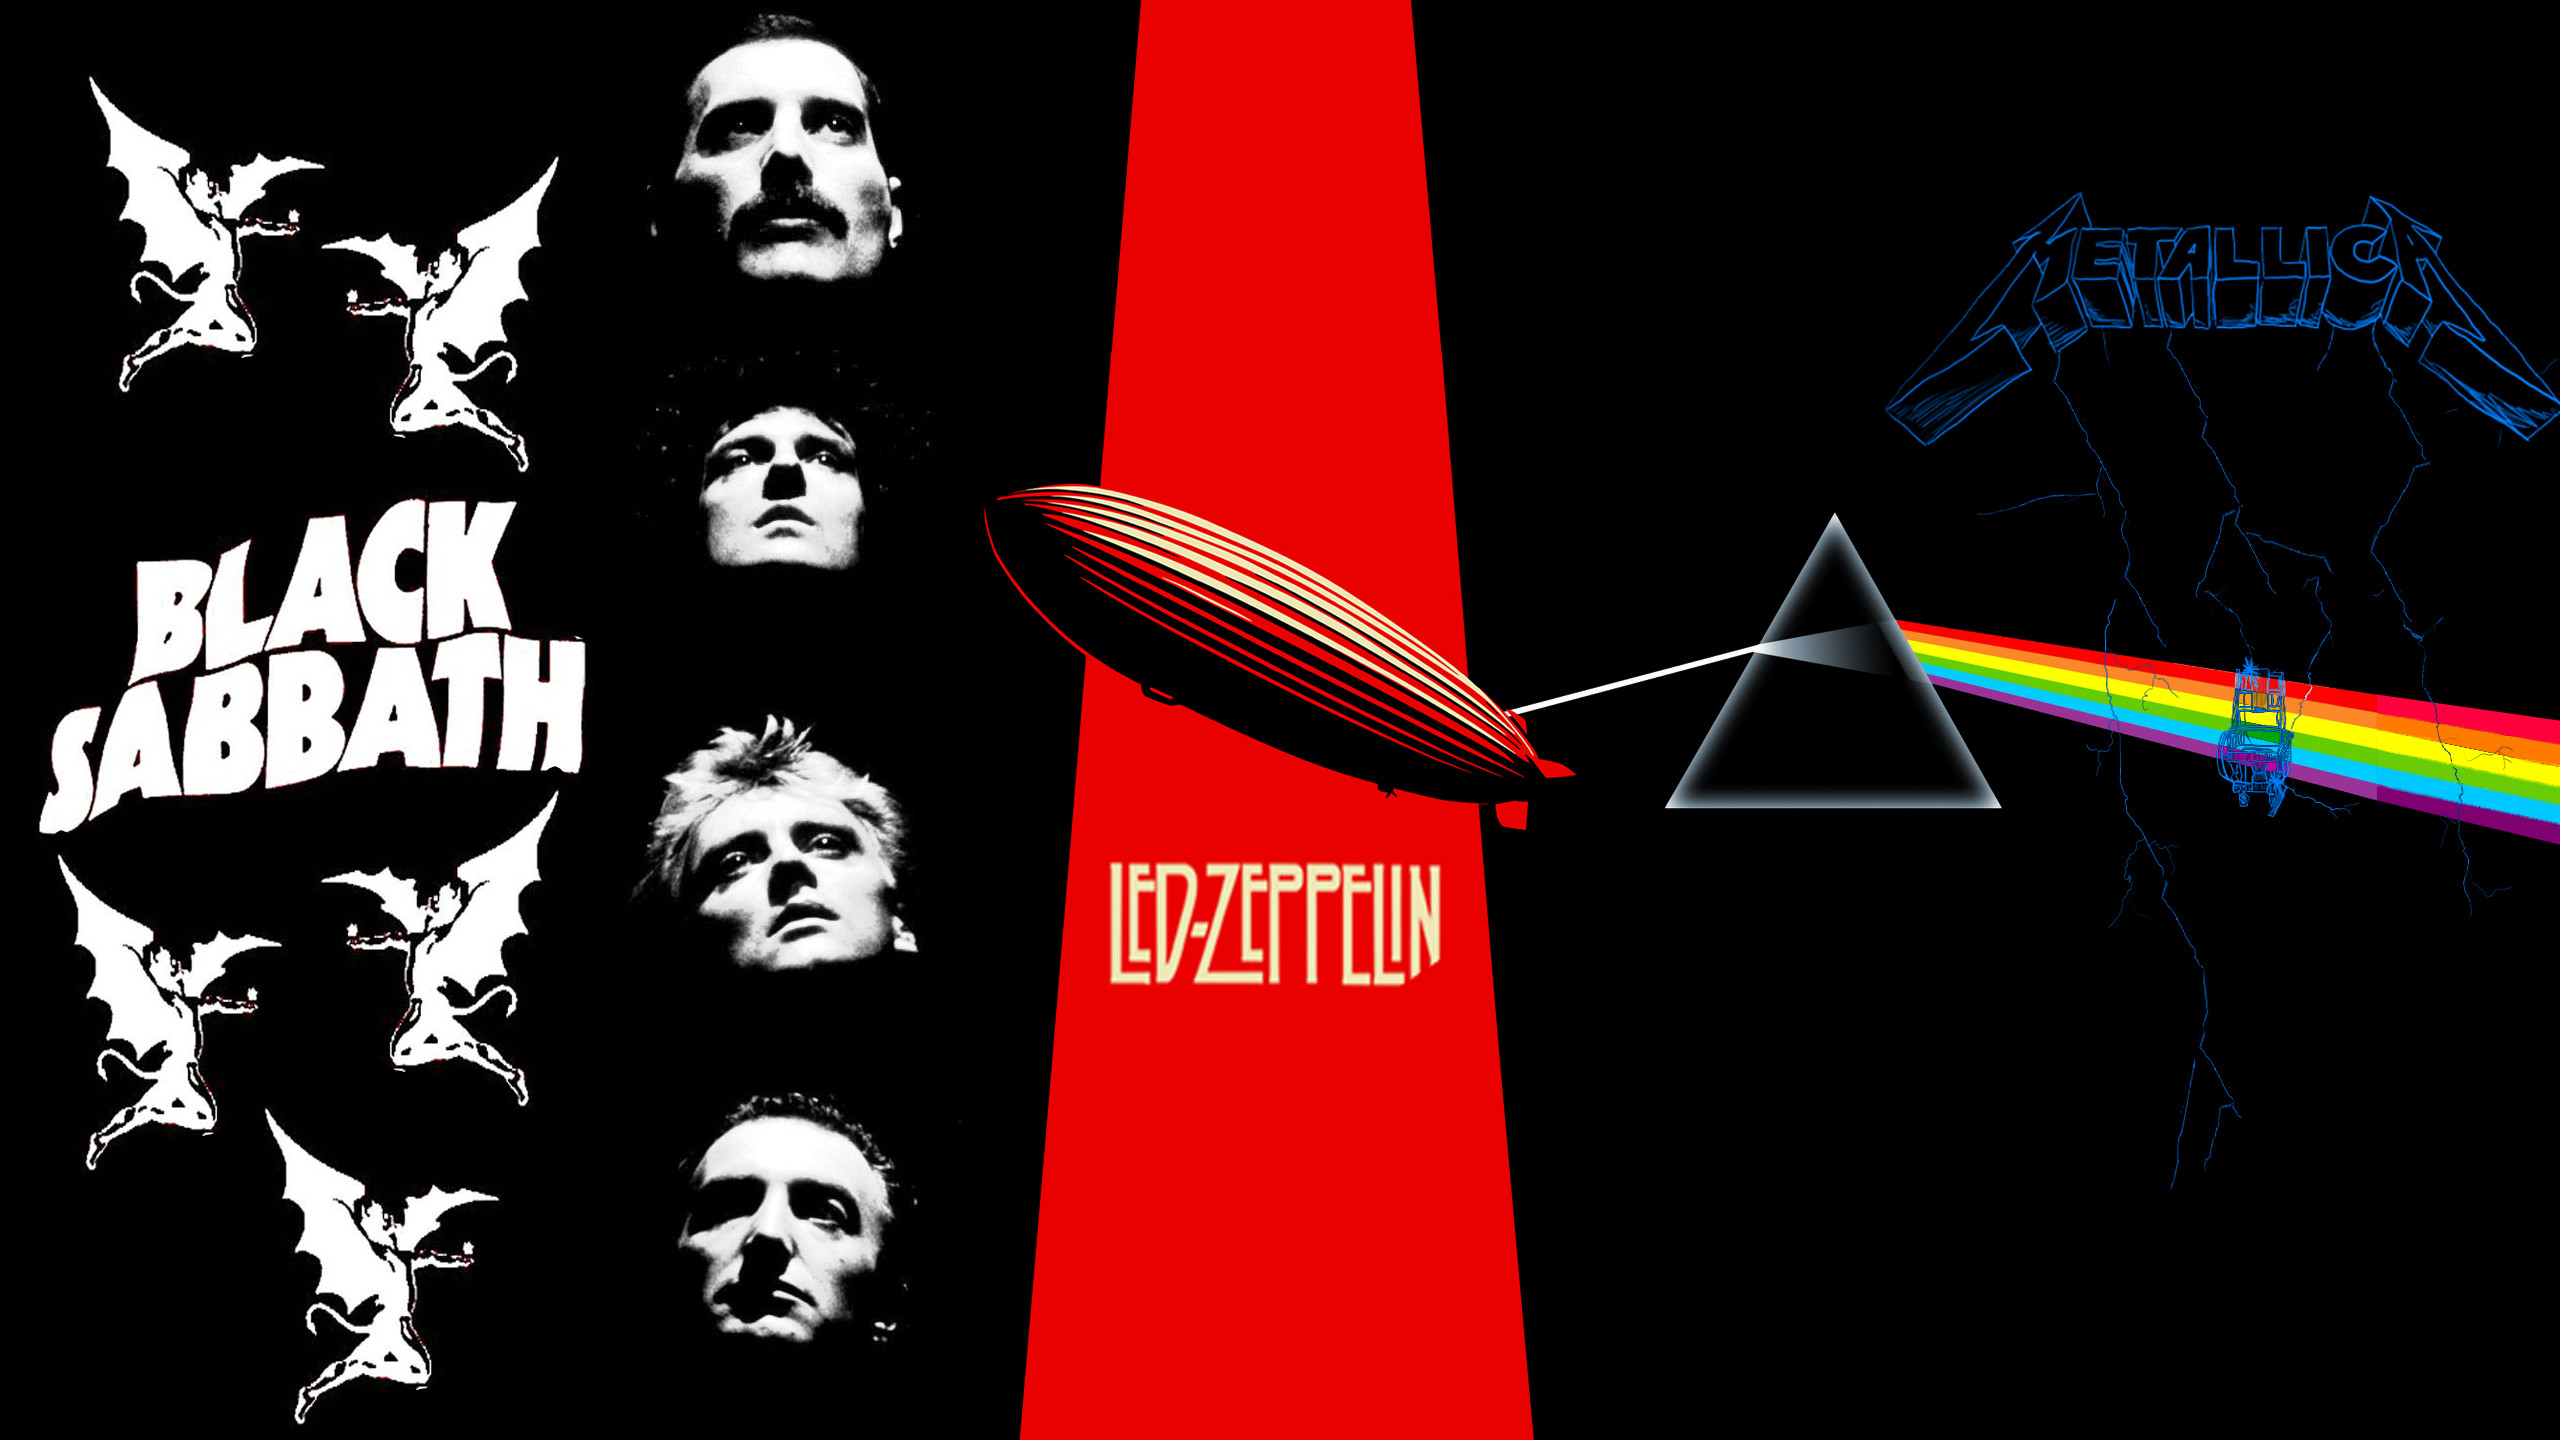 2560x1440 Music from '70s and '80s i like. I hope someone has same taste in music and  uses this wallpaper!